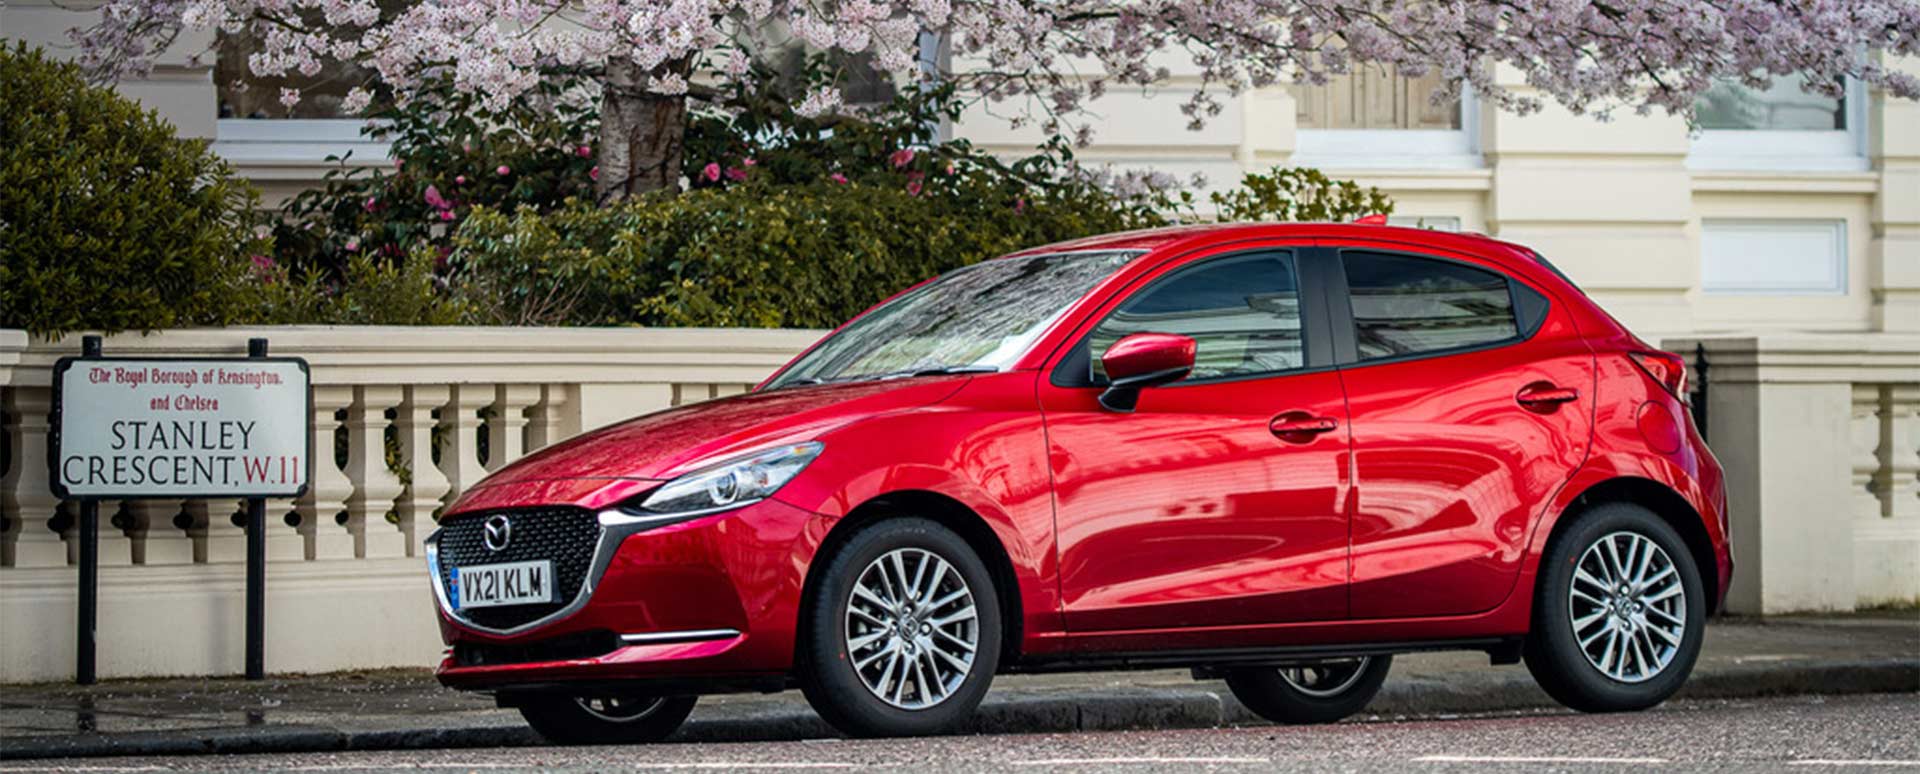 Red Mazda2 parked under a tree